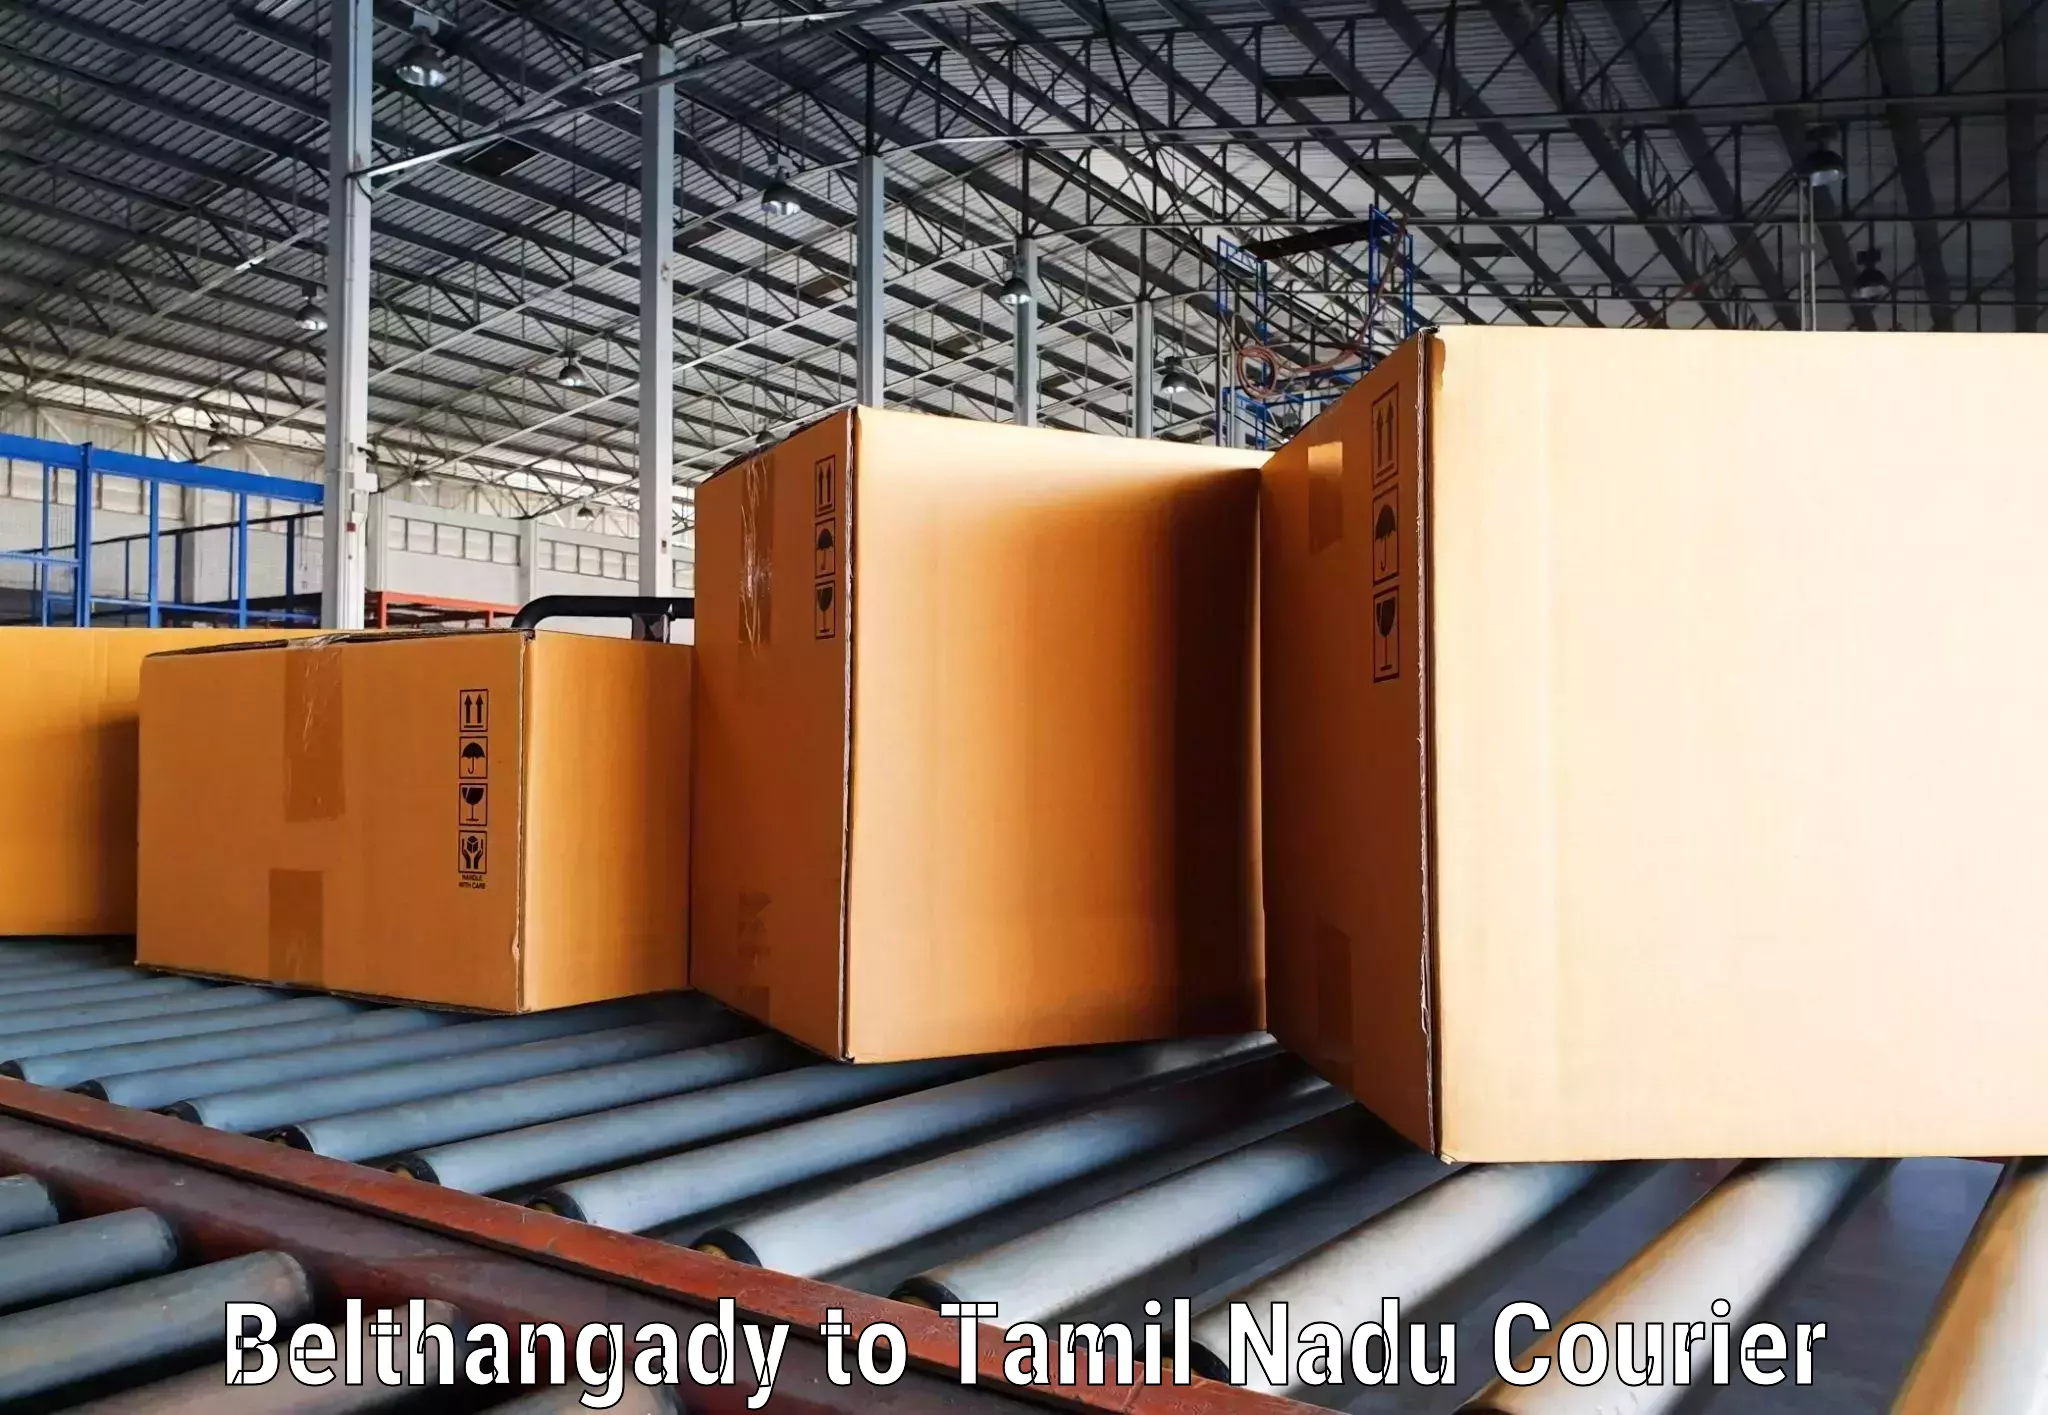 Modern courier technology Belthangady to Thuraiyur